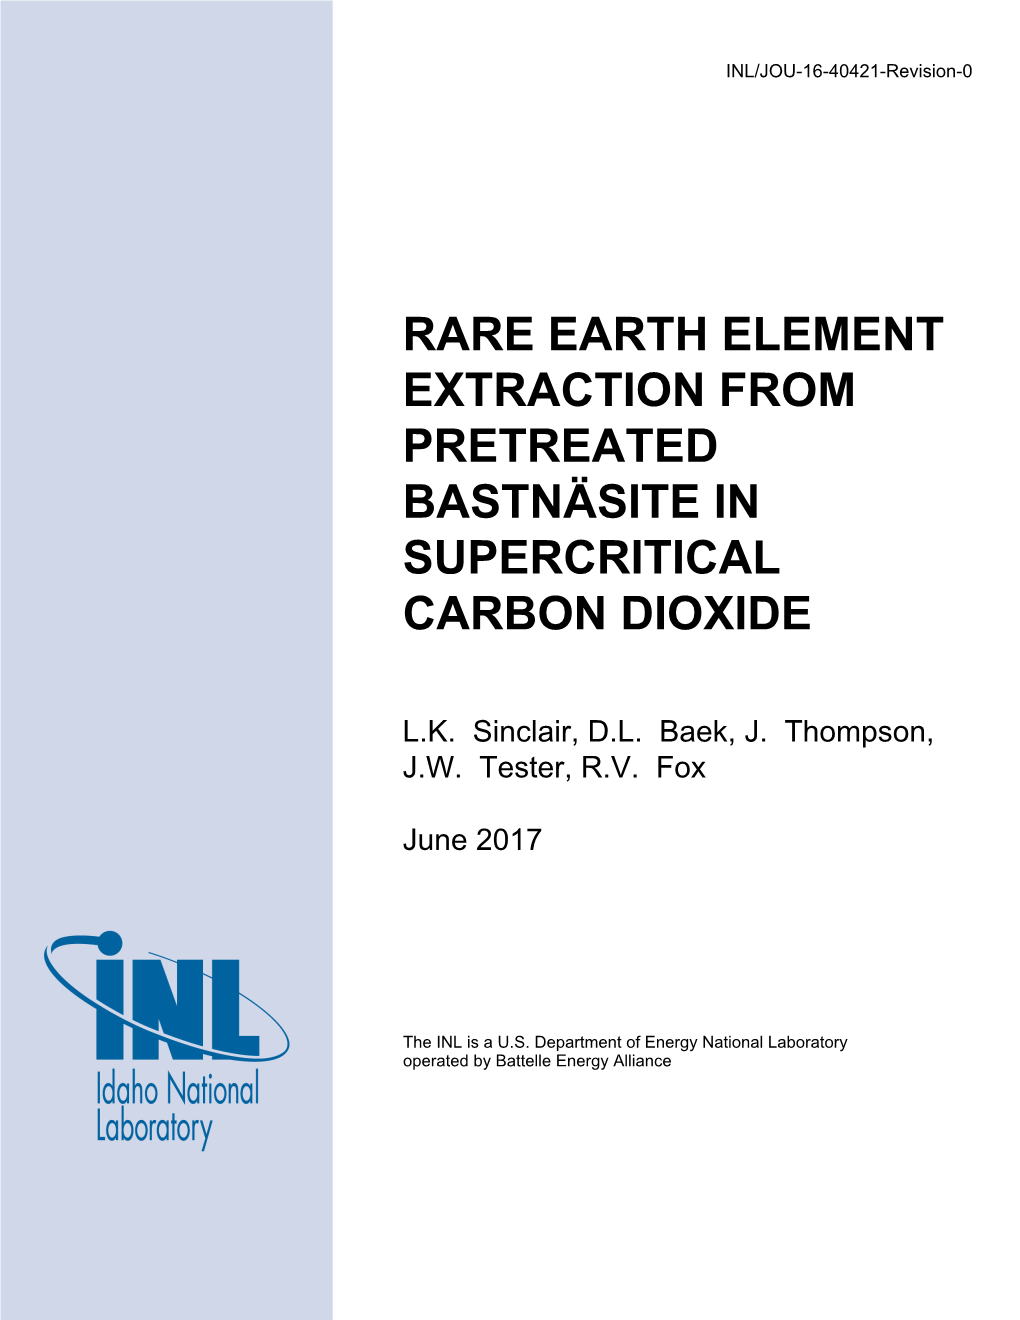 Rare Earth Element Extraction from Pretreated Bastnäsite in Supercritical Carbon Dioxide